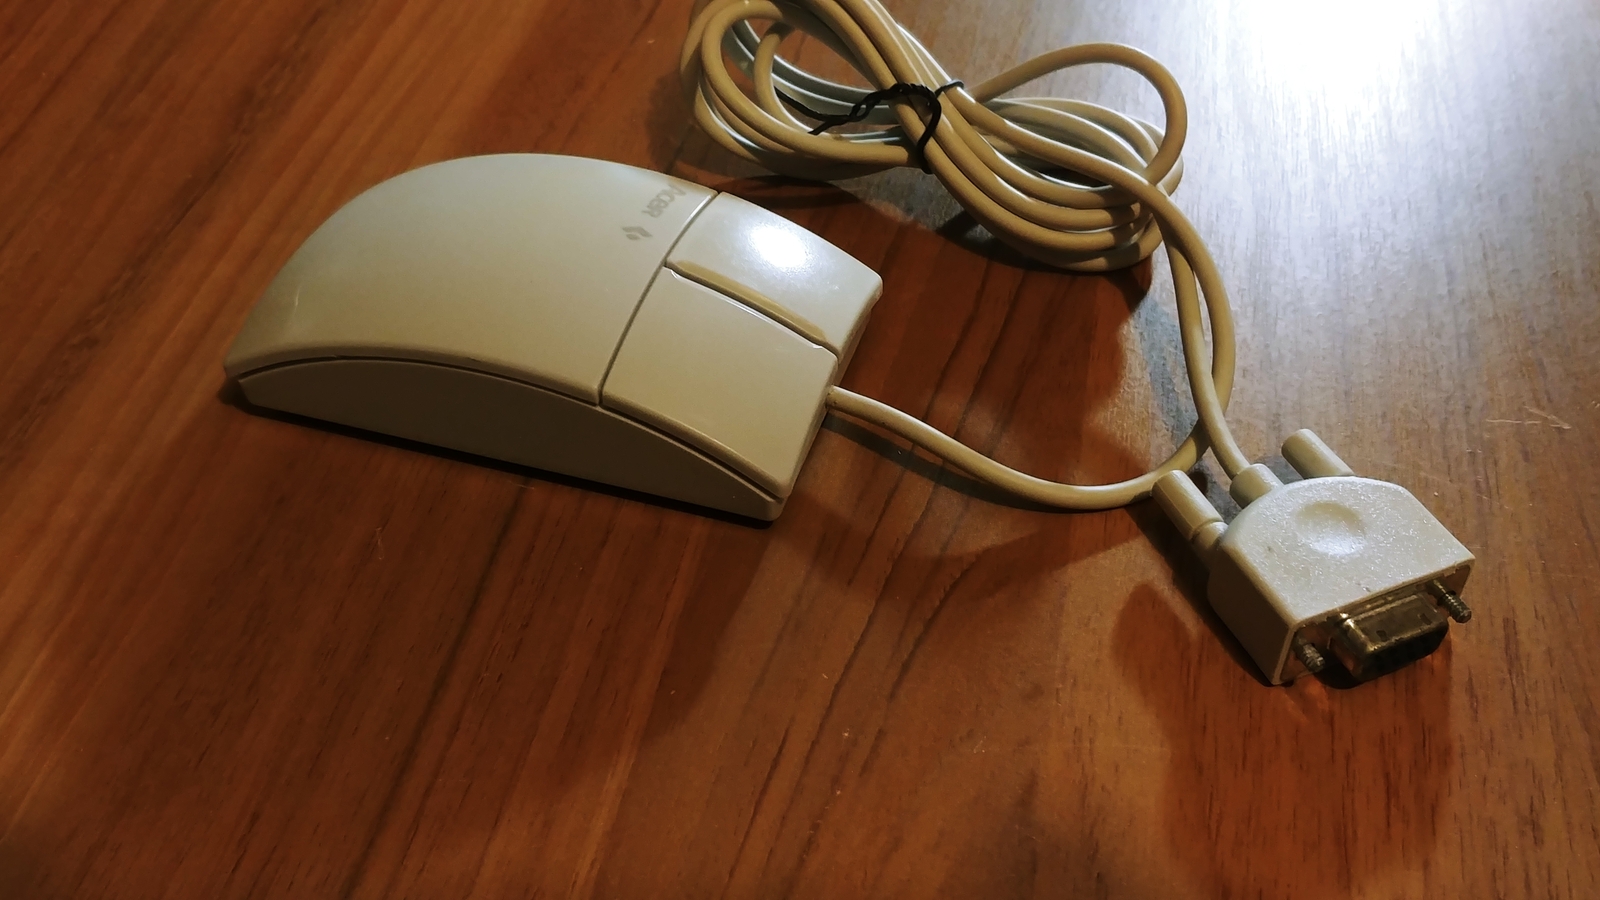 Acer serial mouse